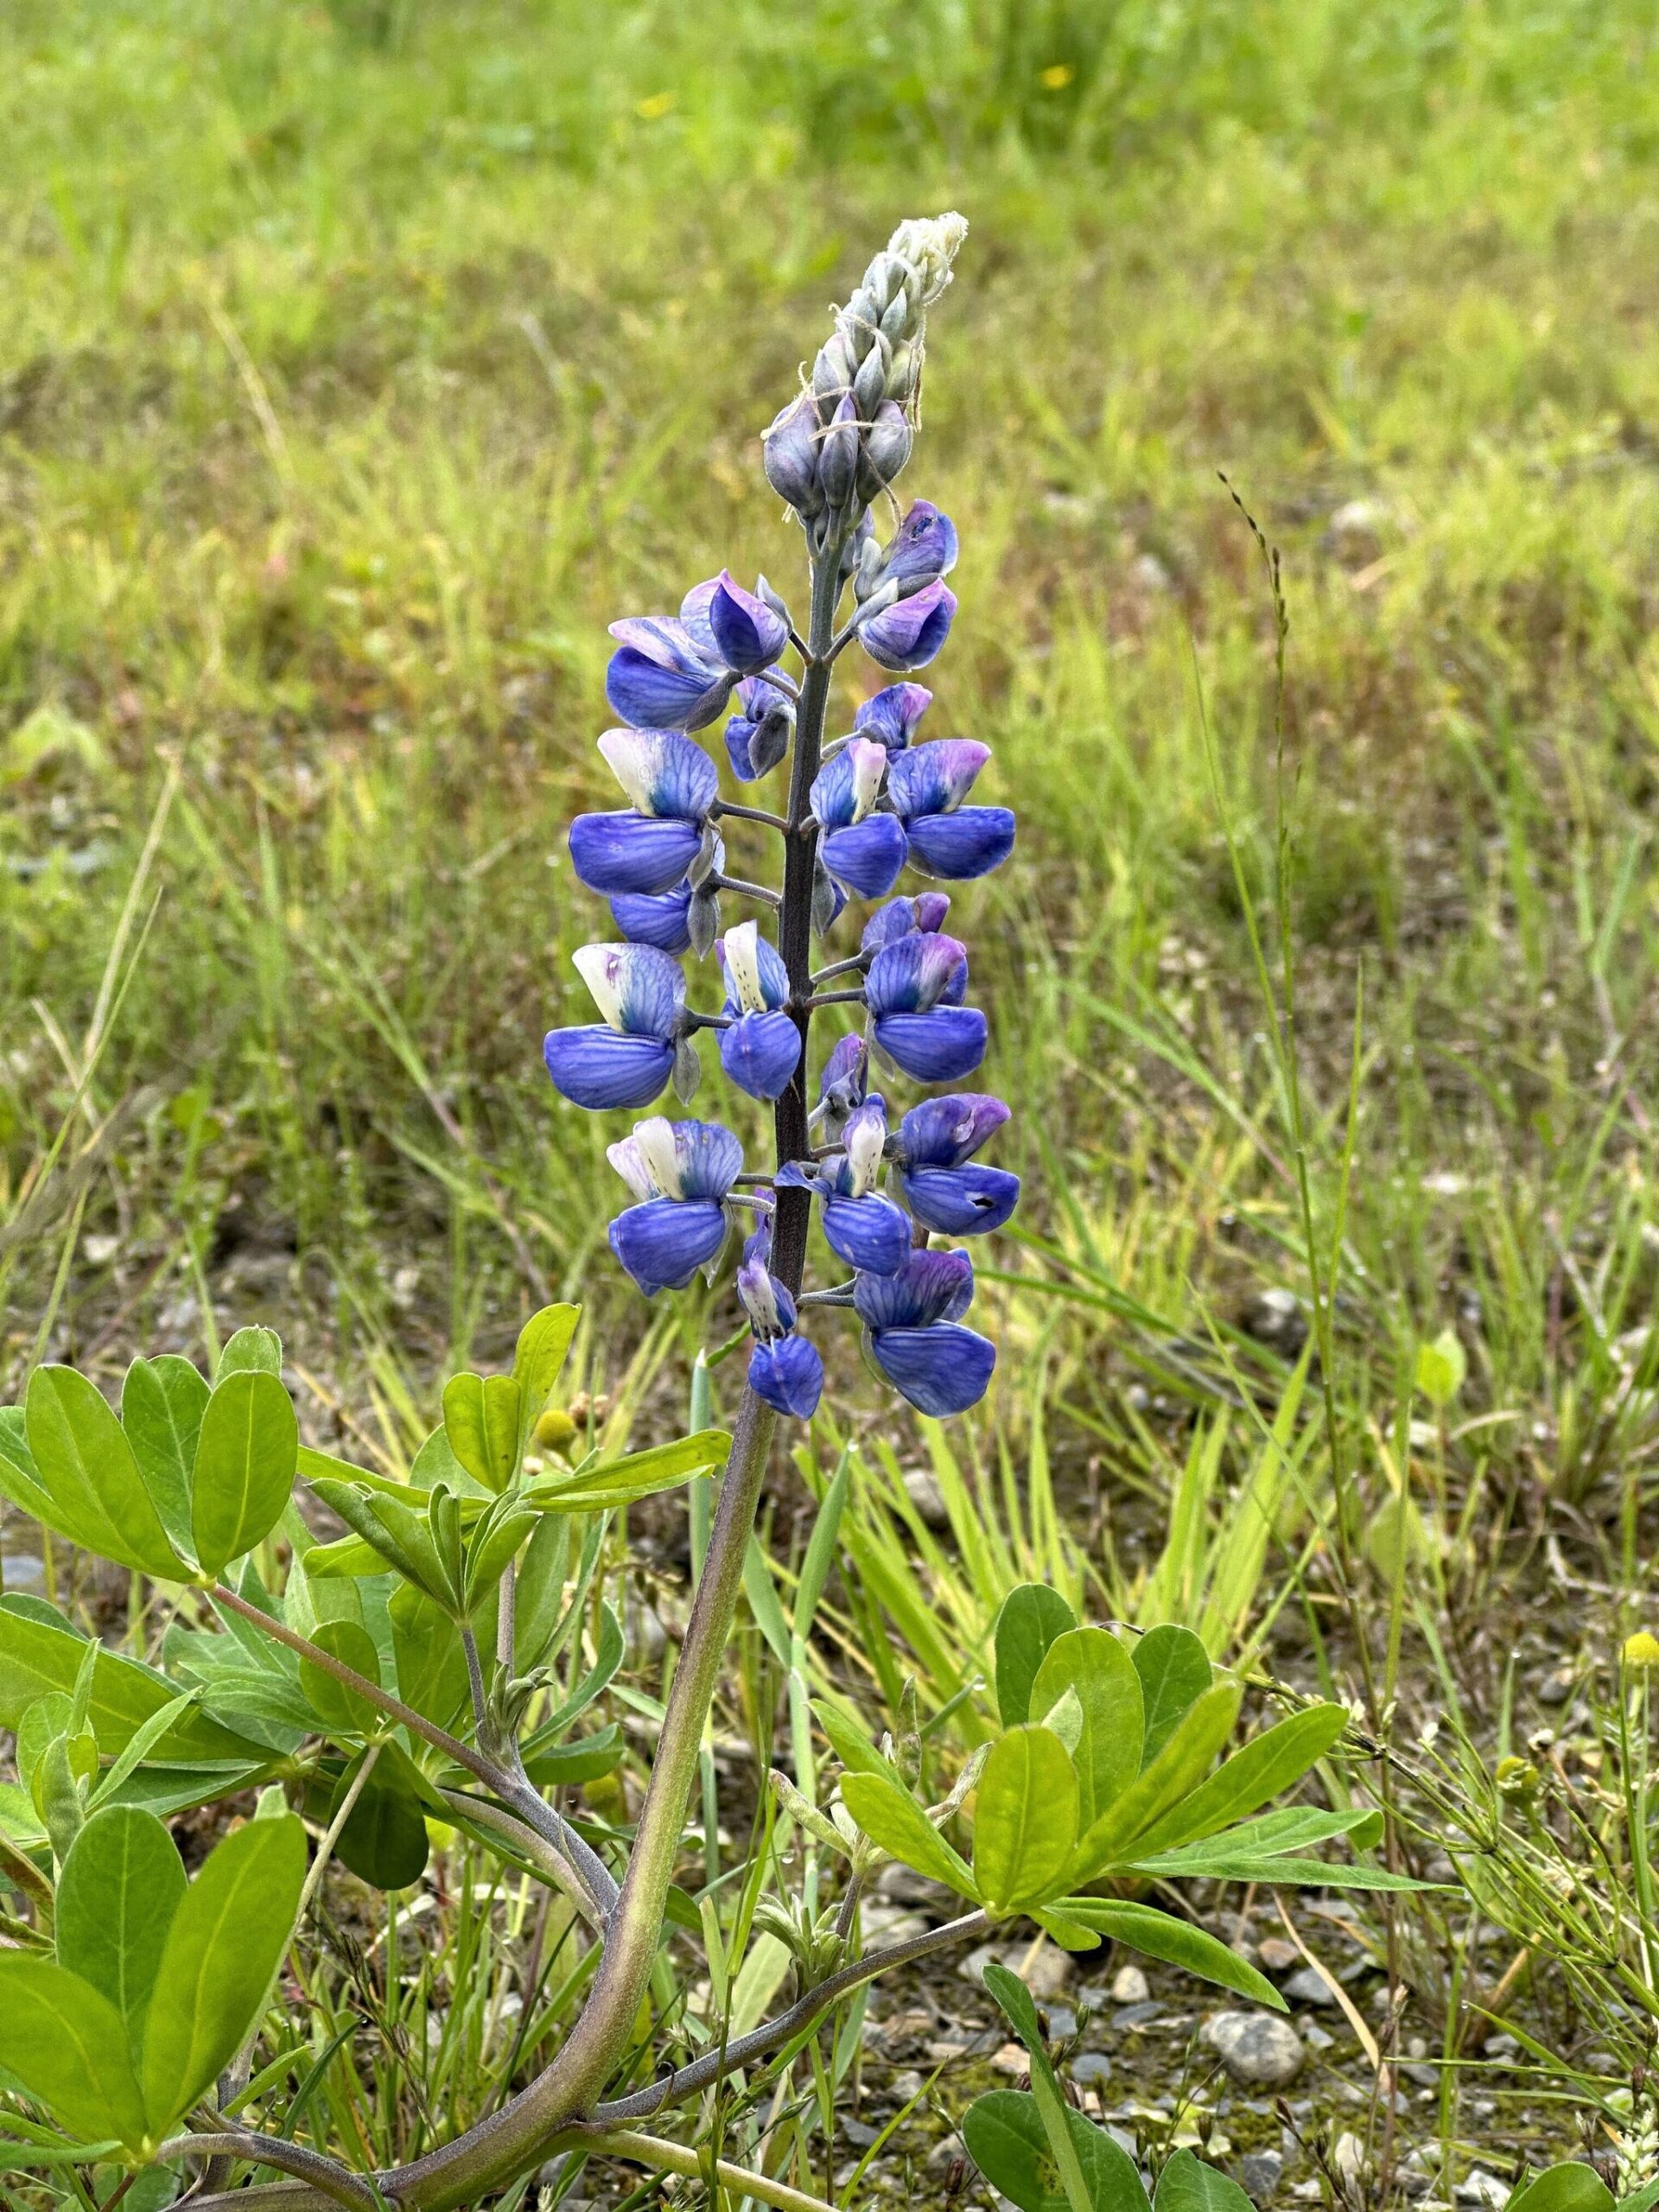 Late-blooming lupine along Cowee Creek Trail to Echo Cove on Aug. 19. (Photo by Deana Barajas)